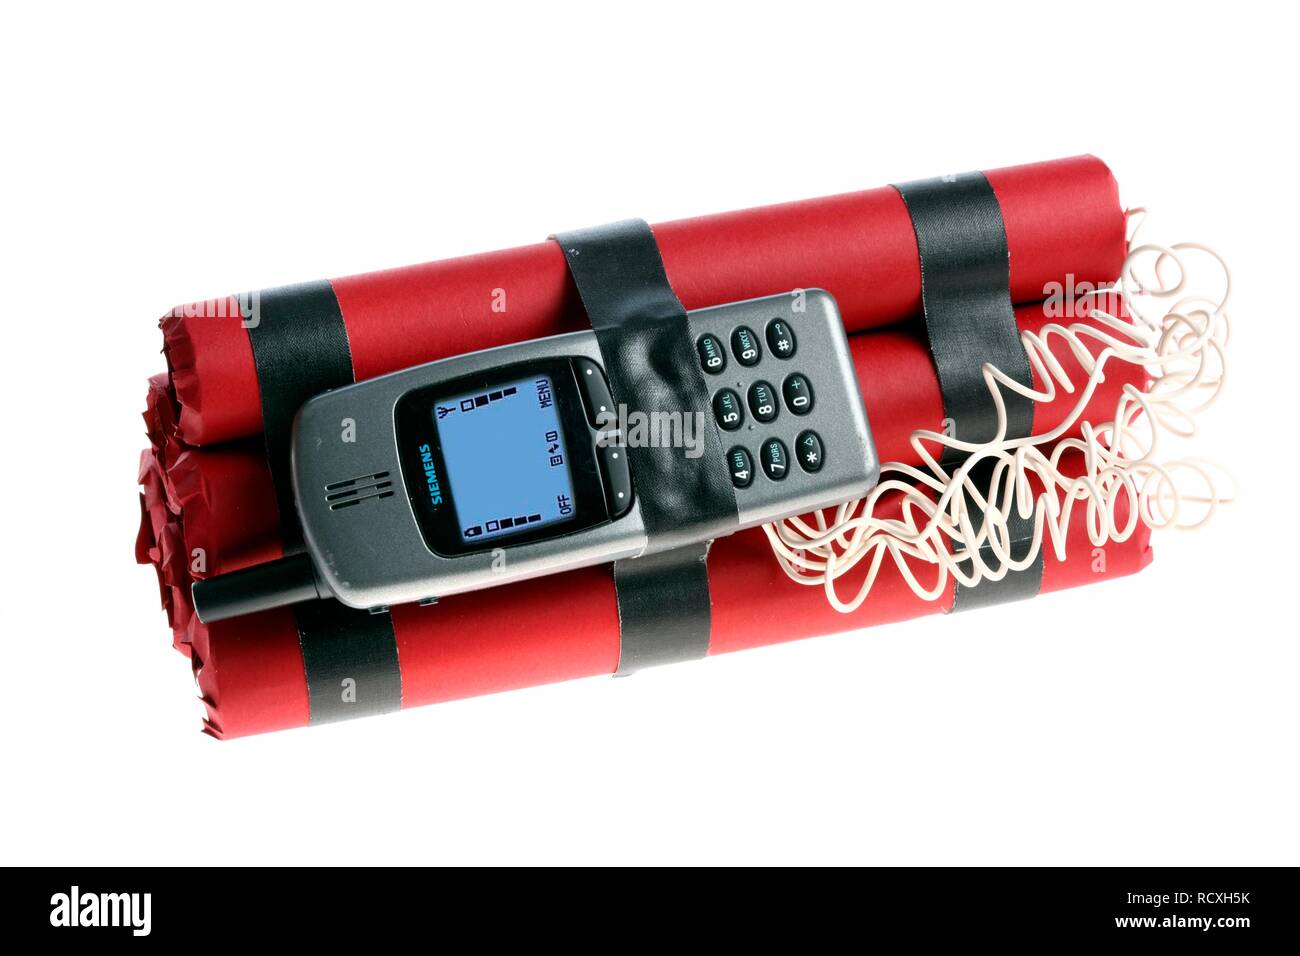 Homemade bomb which can be triggered remotely by a cell phone, symbolic image Stock Photo